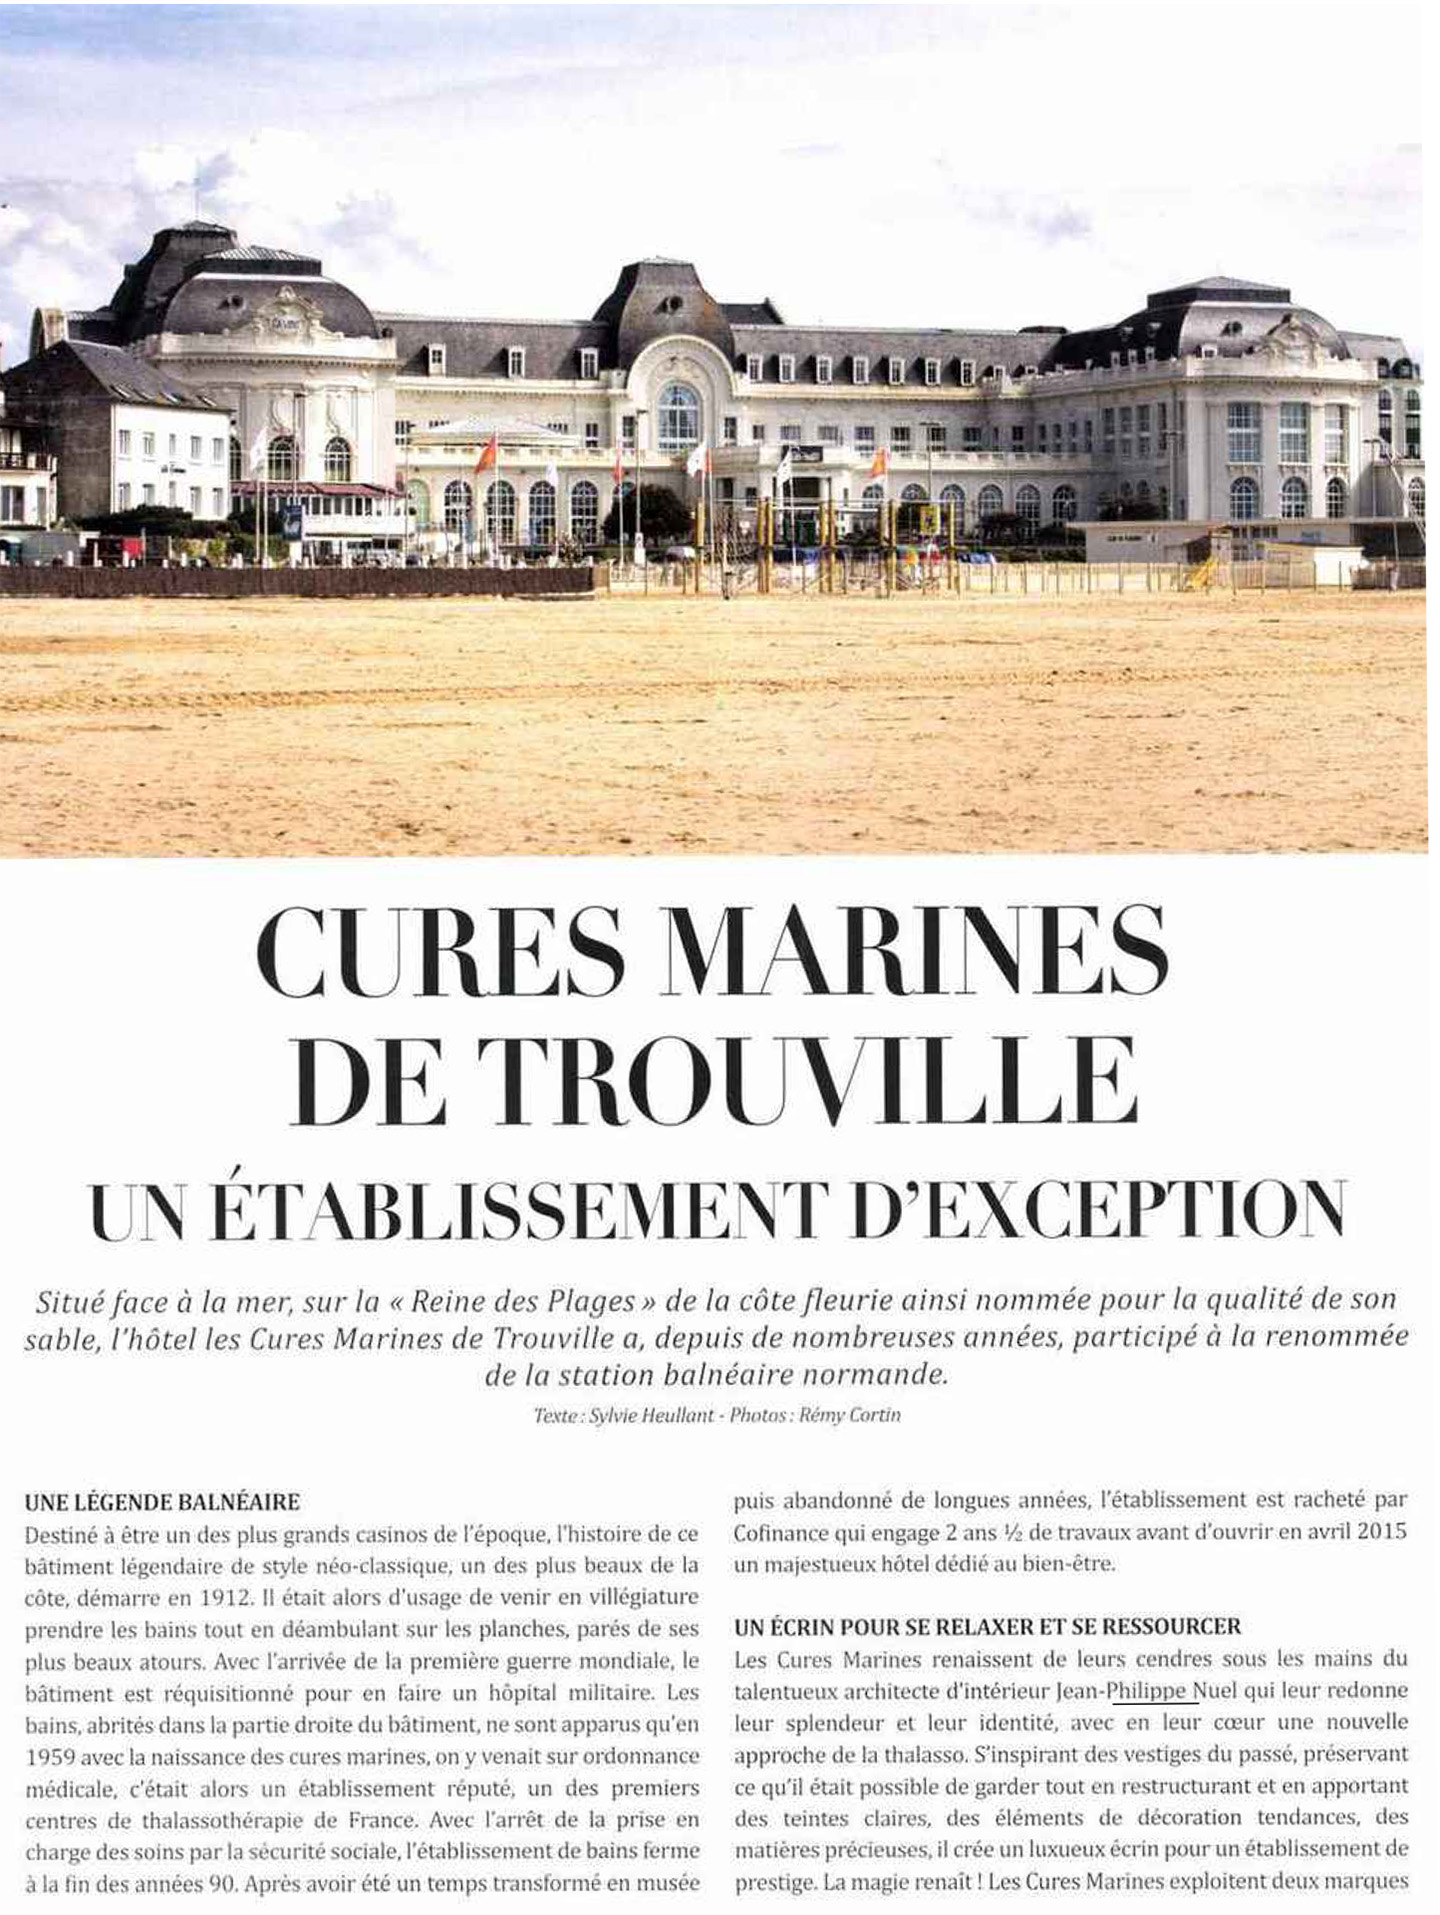 Article on the hotel des Cures Marines de Trouville realized by the studio jean-Philippe Nuel in the magazine Masterchef, new hotel, luxury interior design, thalasso and spa hotel, french luxury hotel